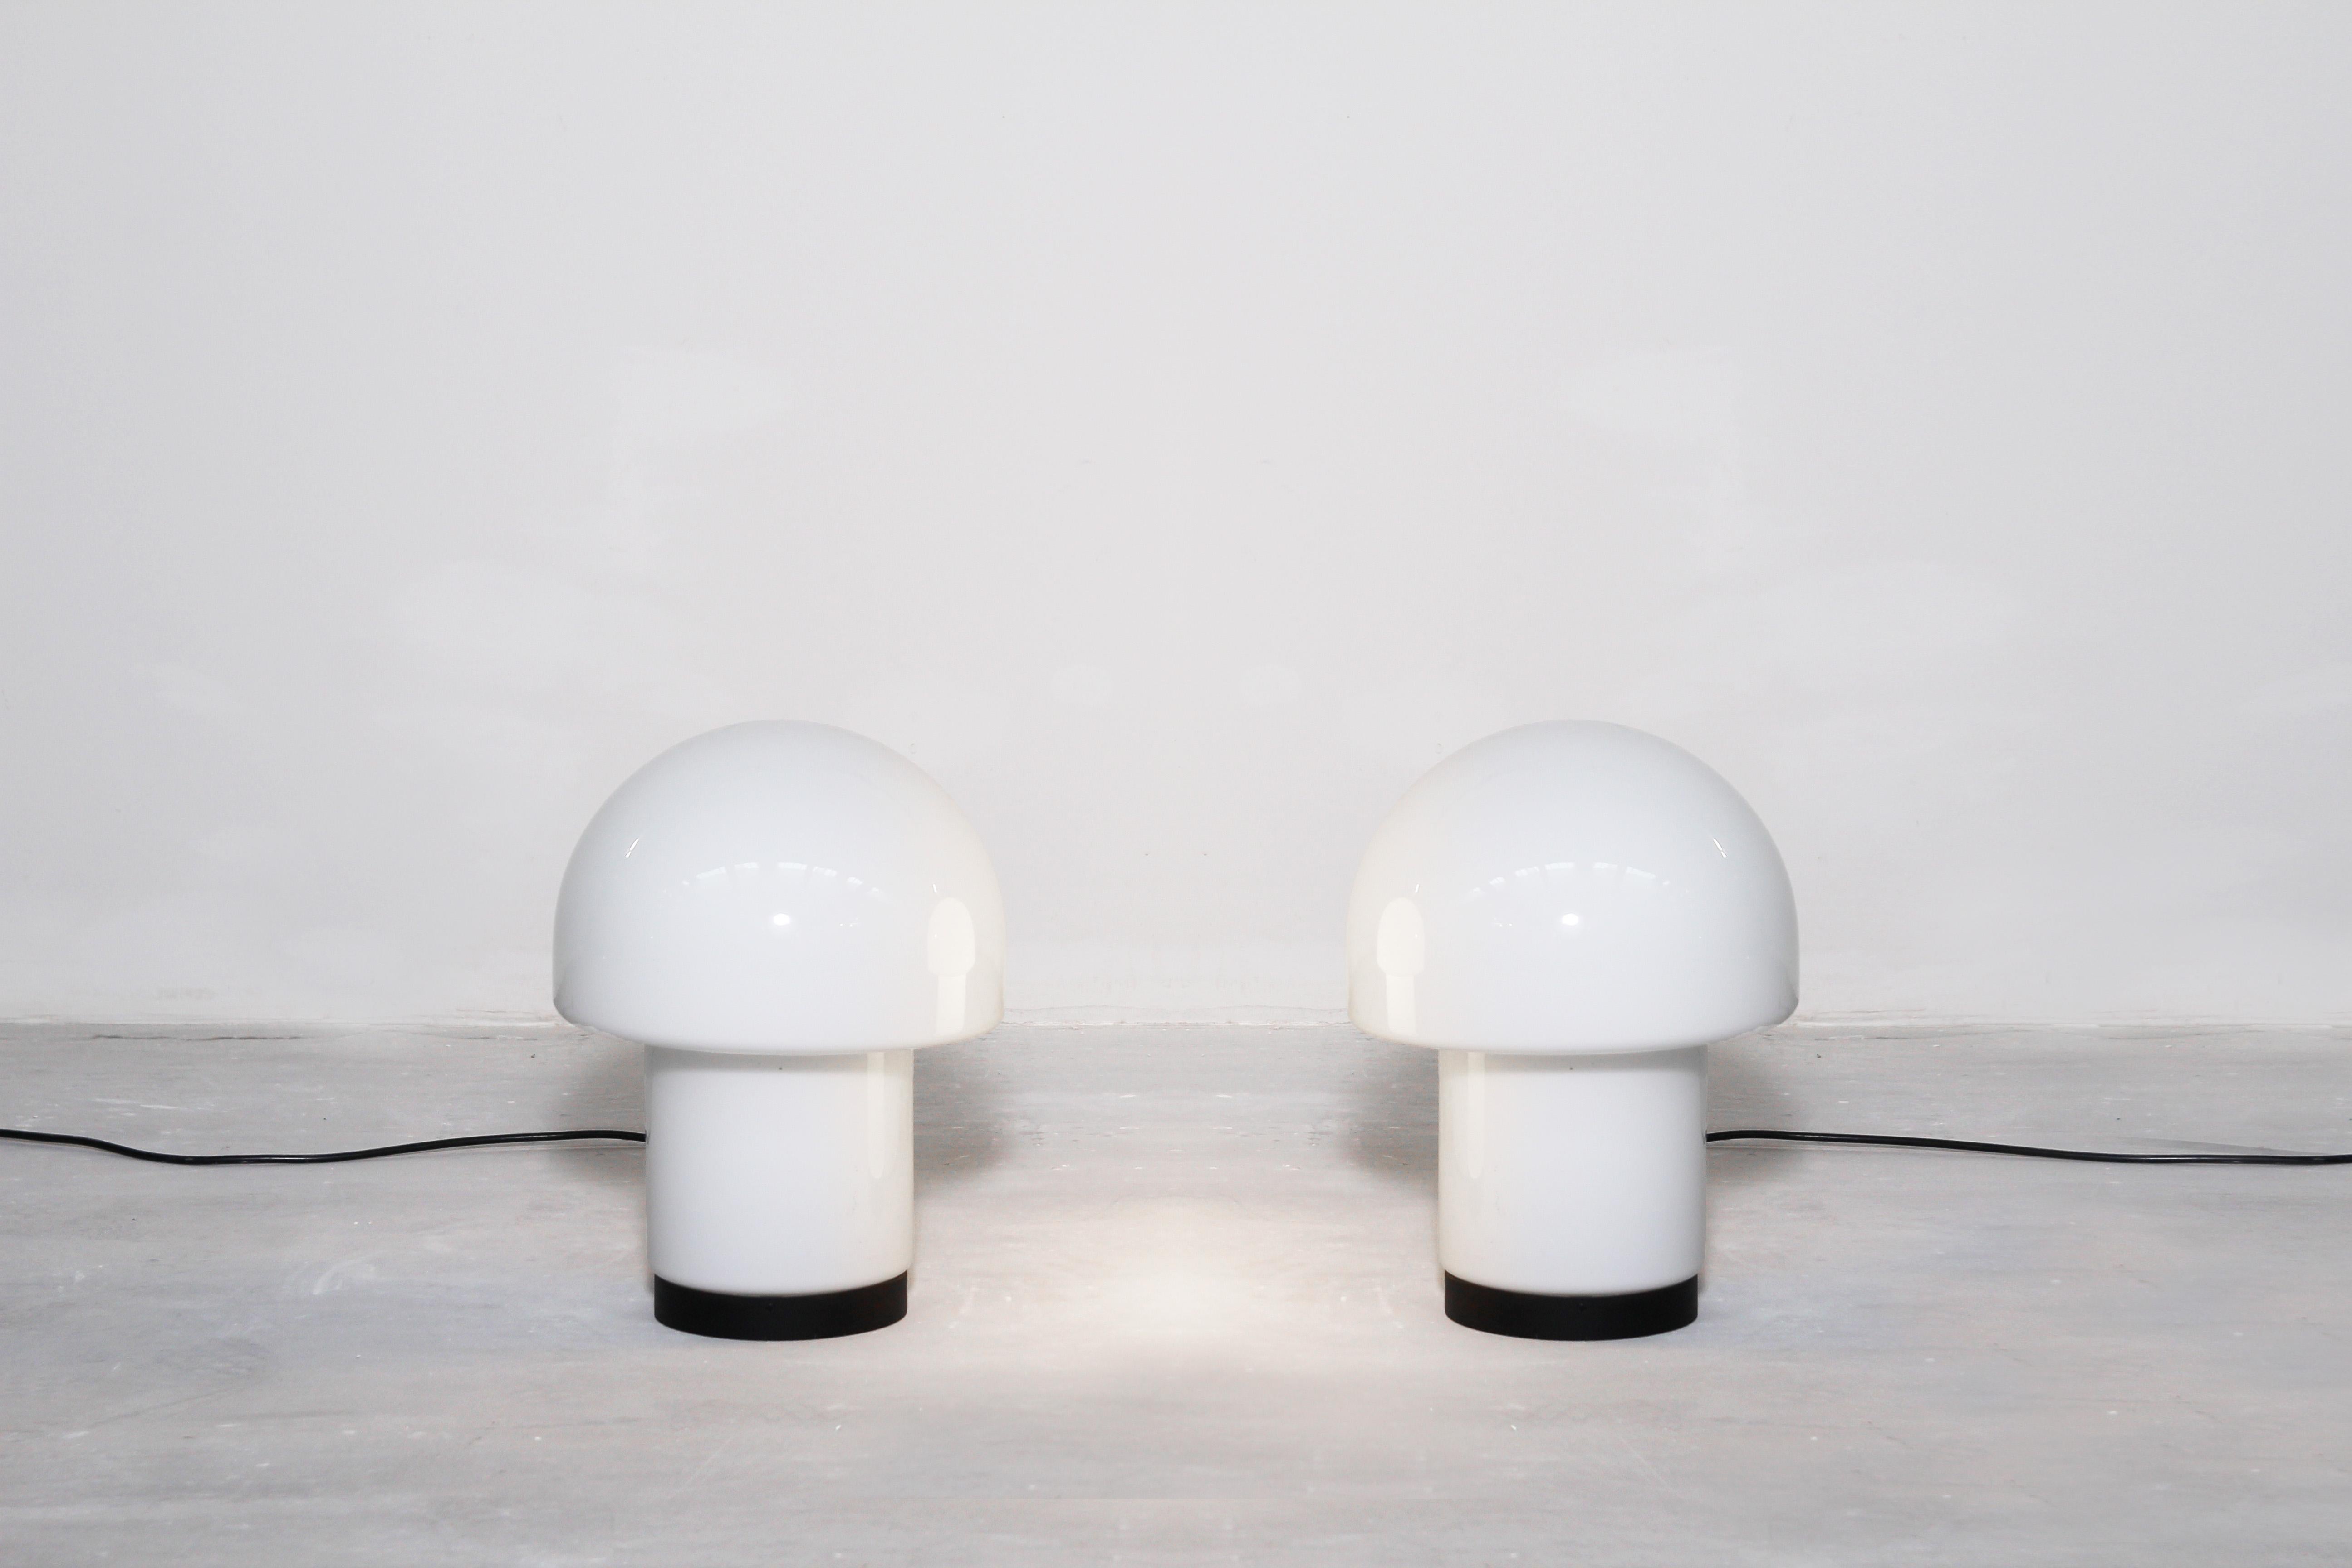 20th Century Pair of Two Table Lamps Lights by Glashütte Limburg, Germany, 1960s